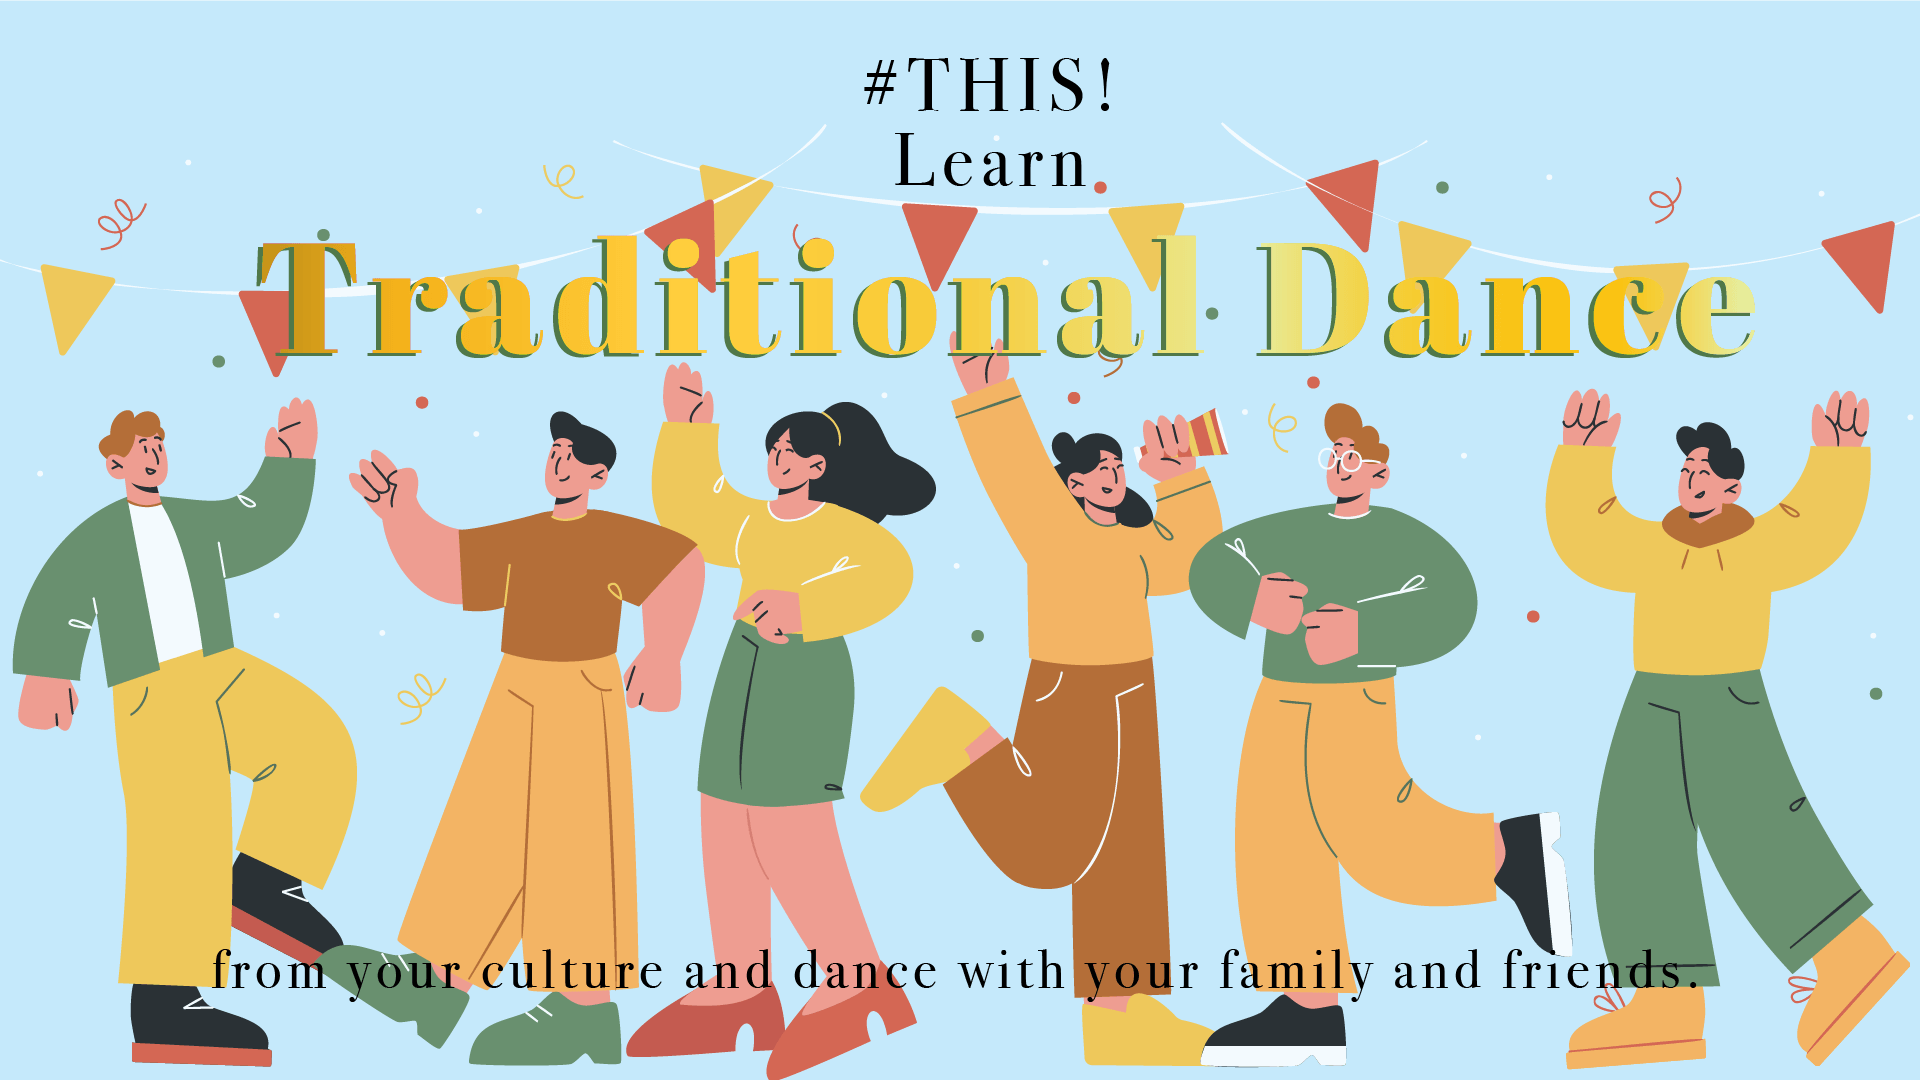 First line: #THIS! Second line: Learn Third Line: Traditional Dance Fourth line: from your culture and dance with your family and friends. Graphic in the background there carnival garland flags decorative colorful party, and six peoples dancing.